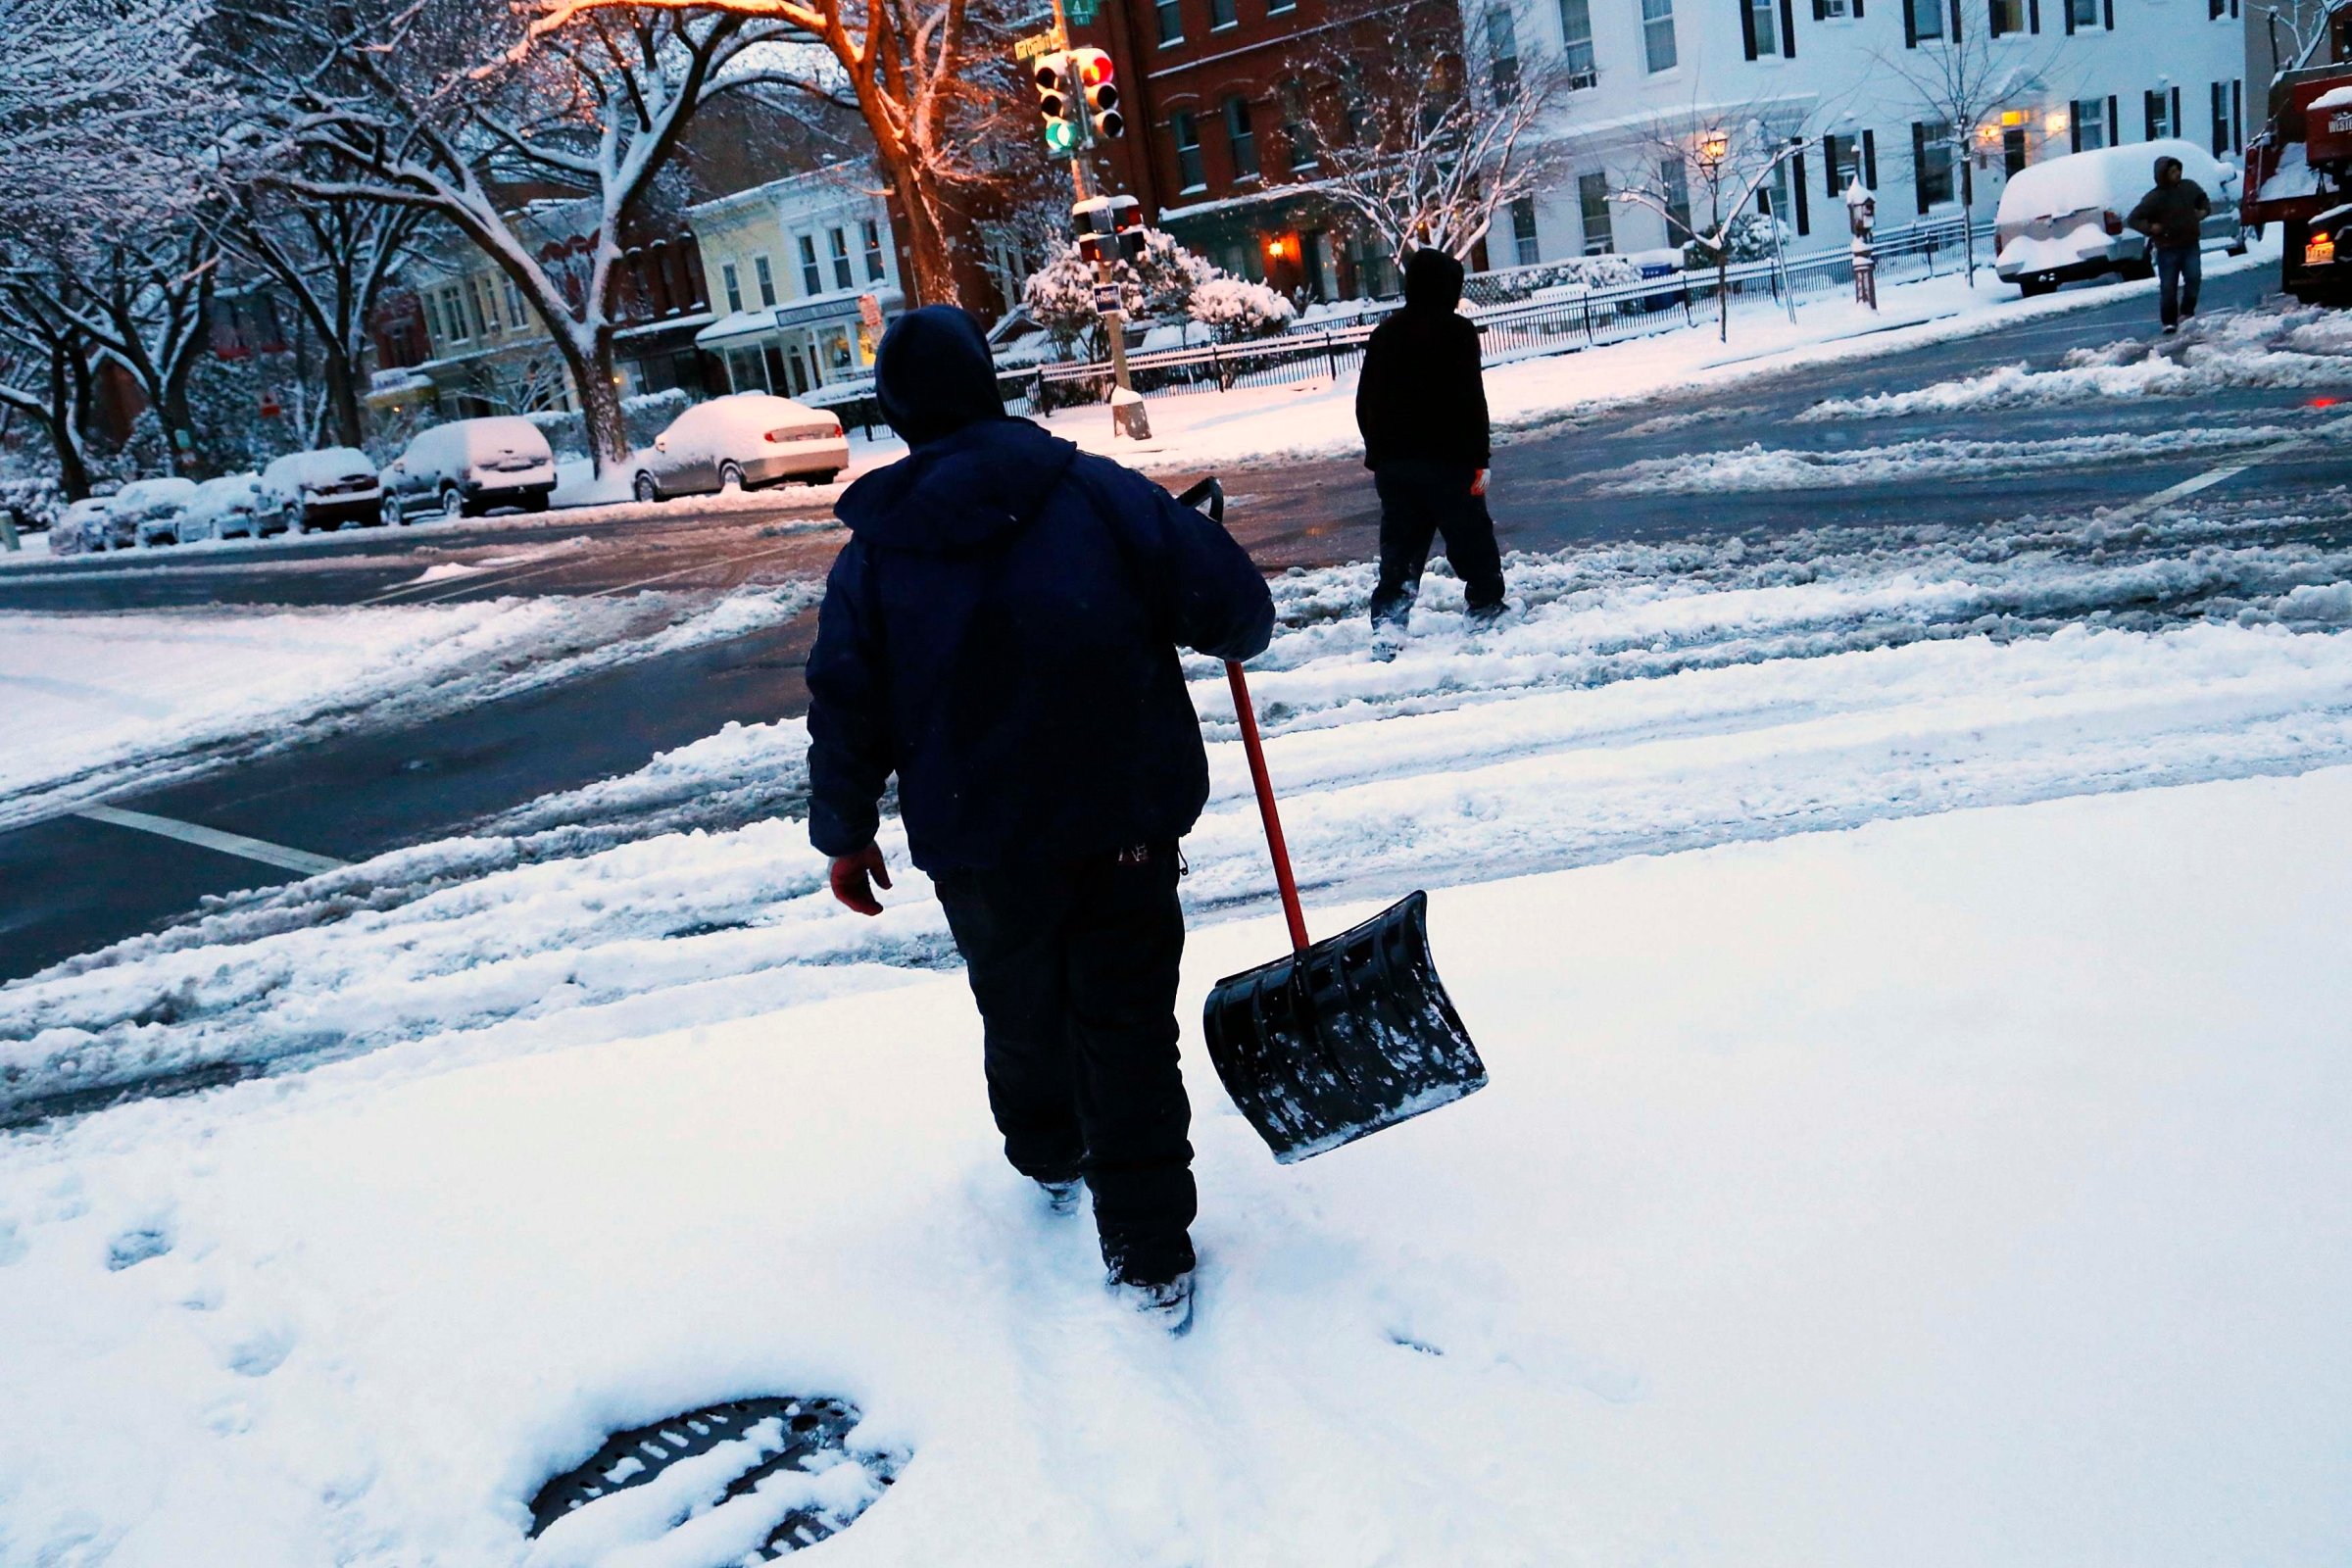 Snow shovelers in the Capitol Hill neighborhood in Washington, D.C., on March 17, 2014.